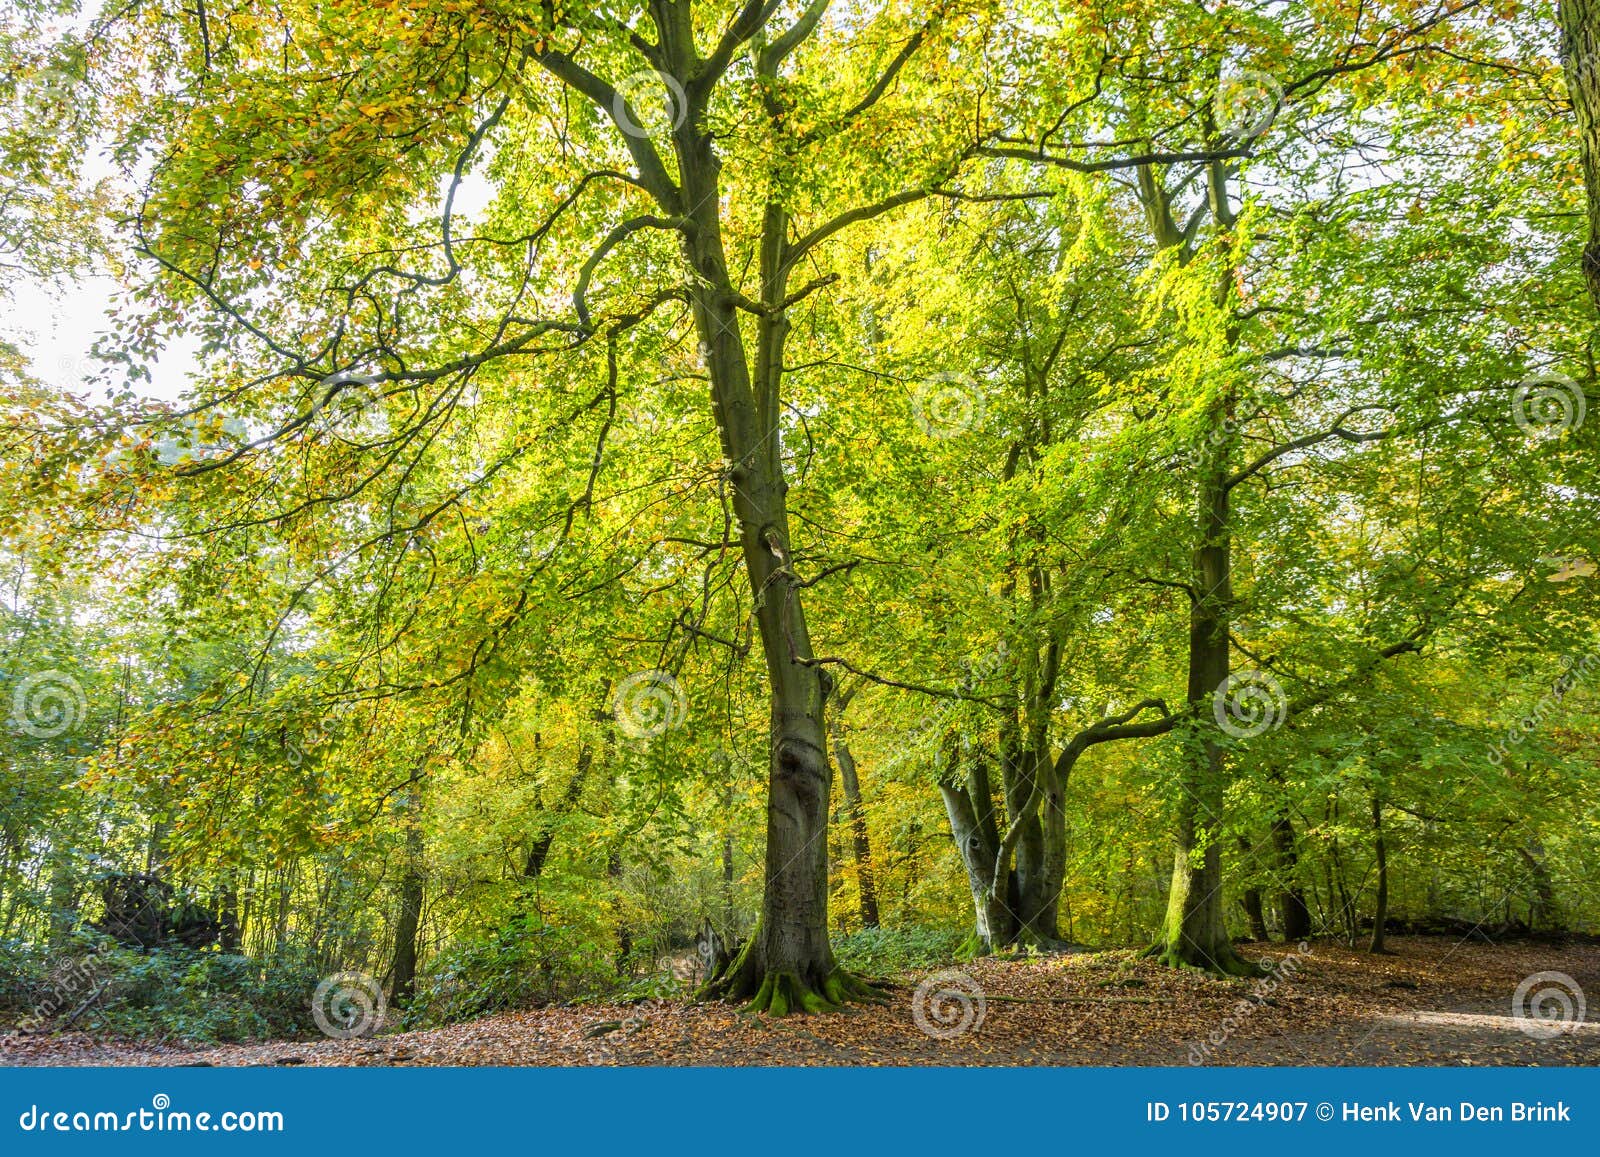 Forests With Mature Beech Trees In Old Country Estate Groenendaal Stock